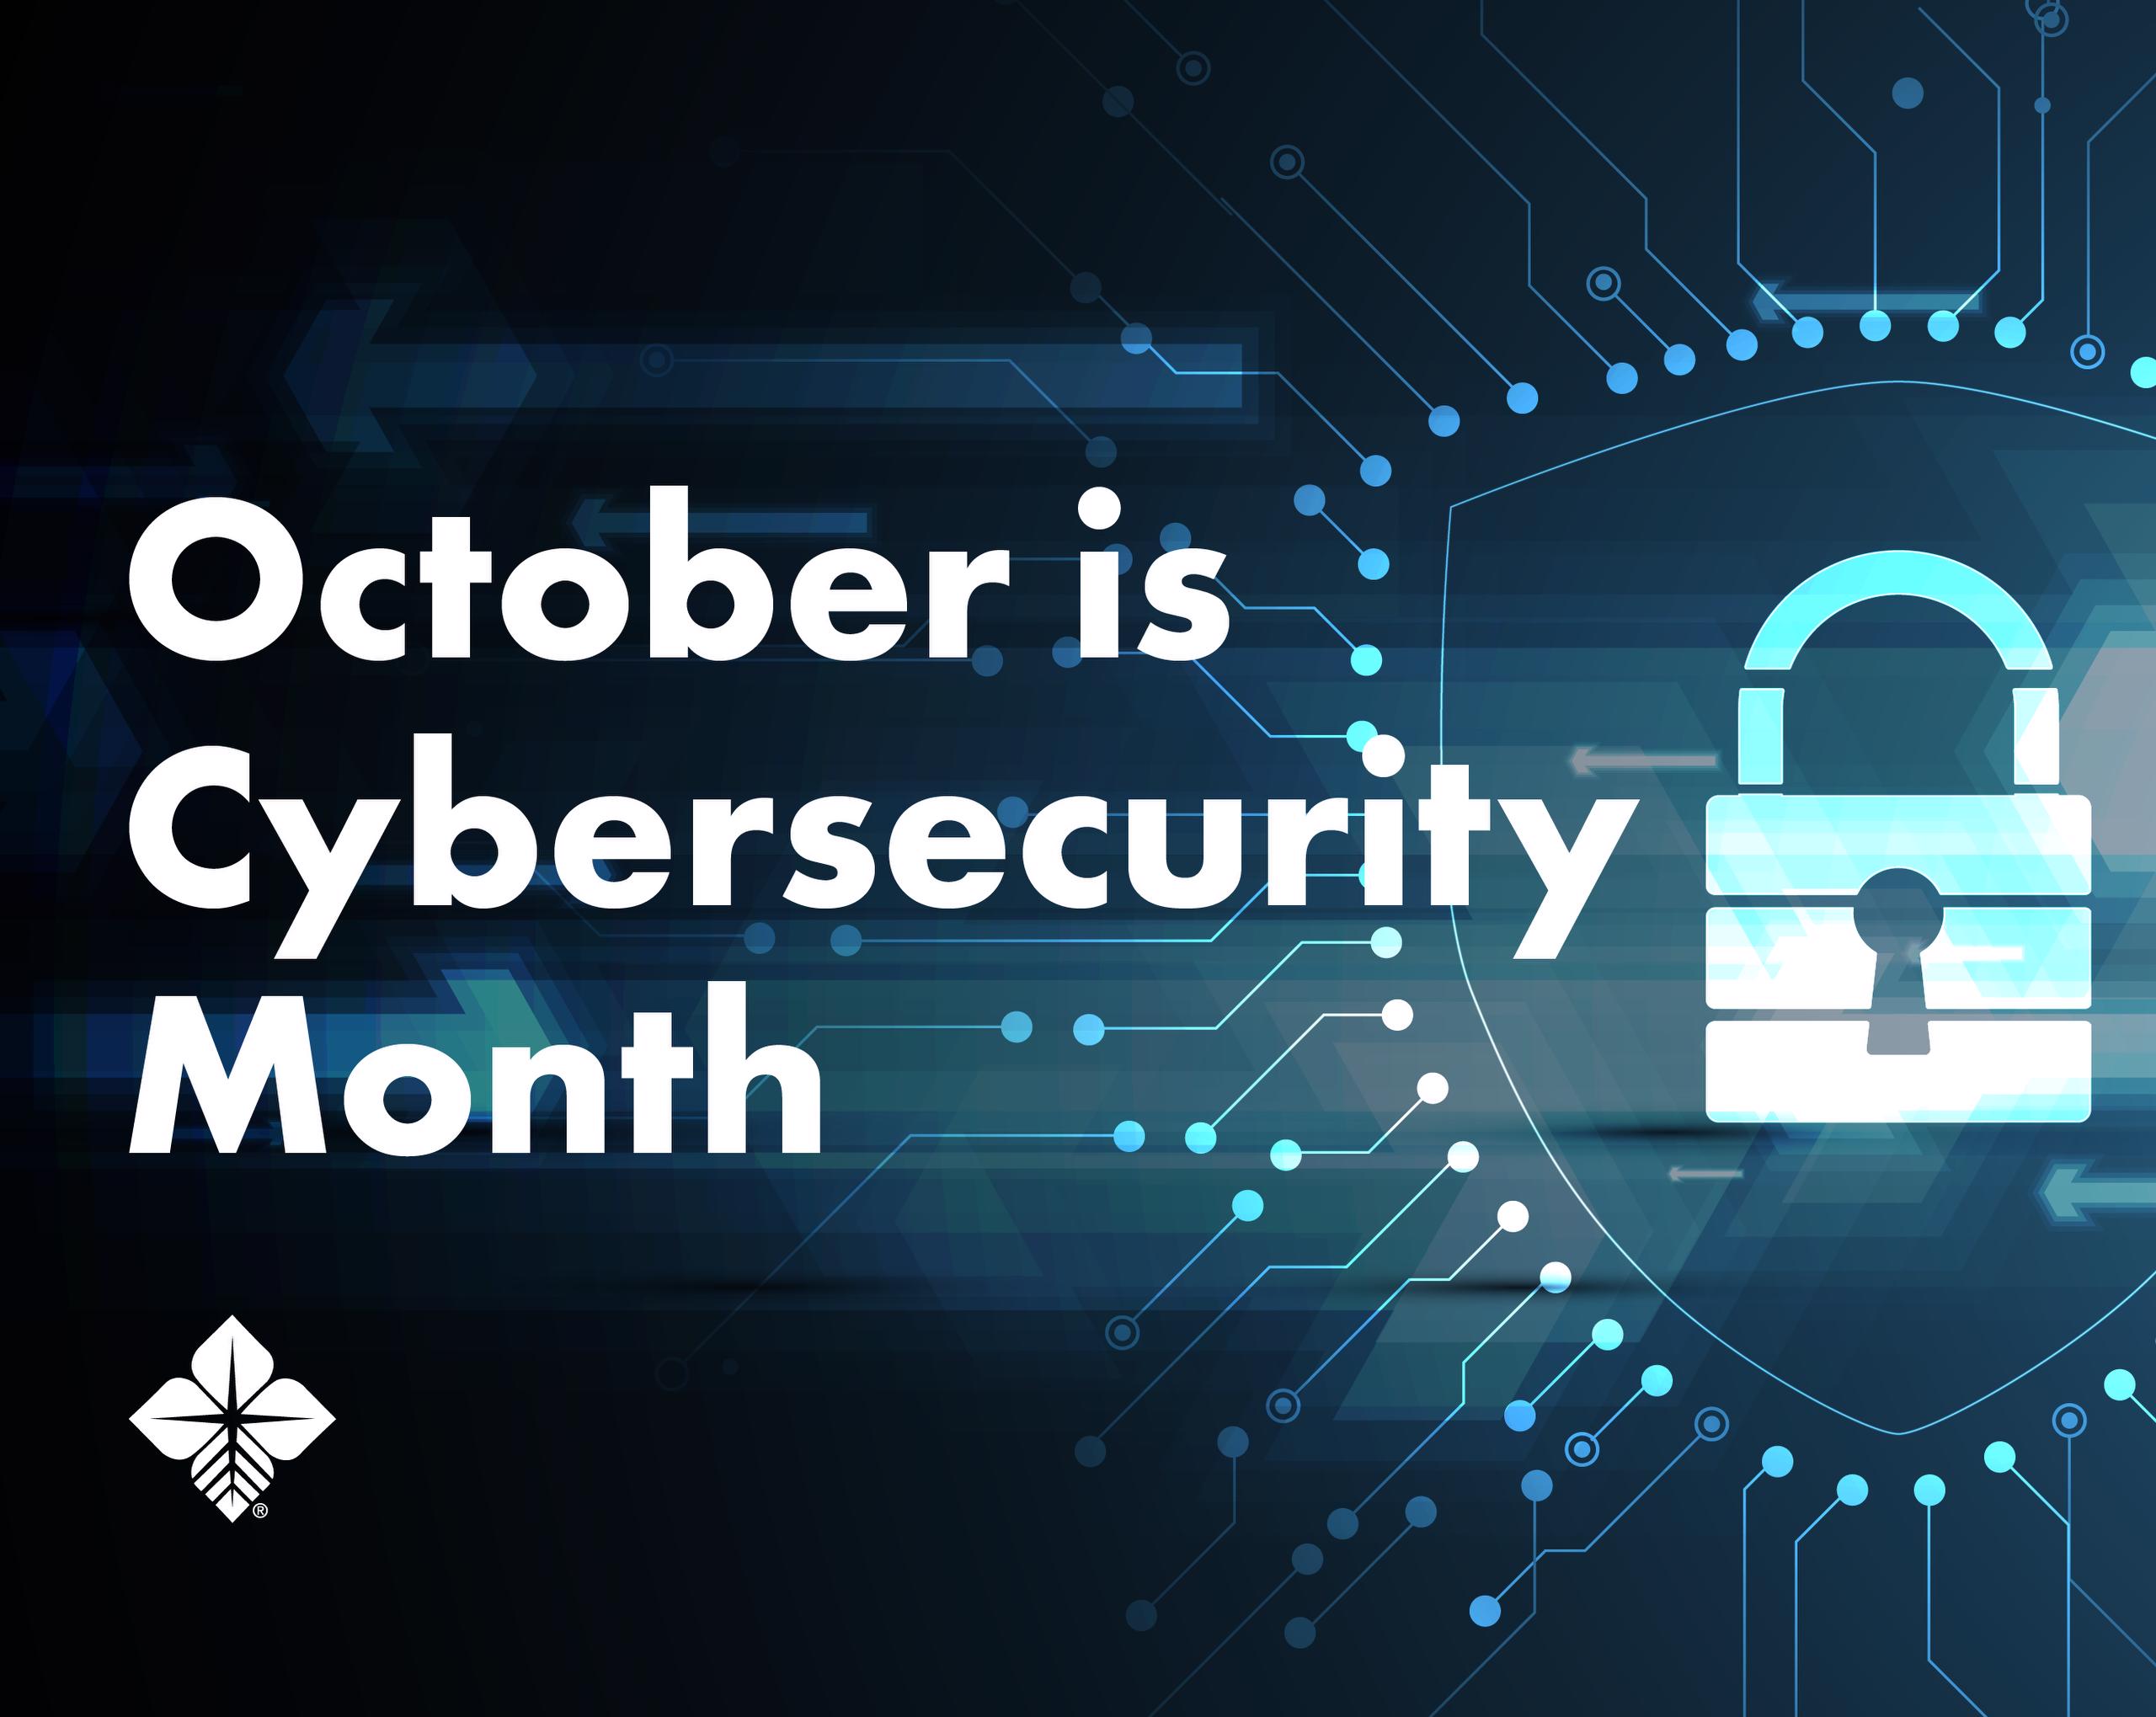 October 2023 is Cybersecurity Month, digital lock background image